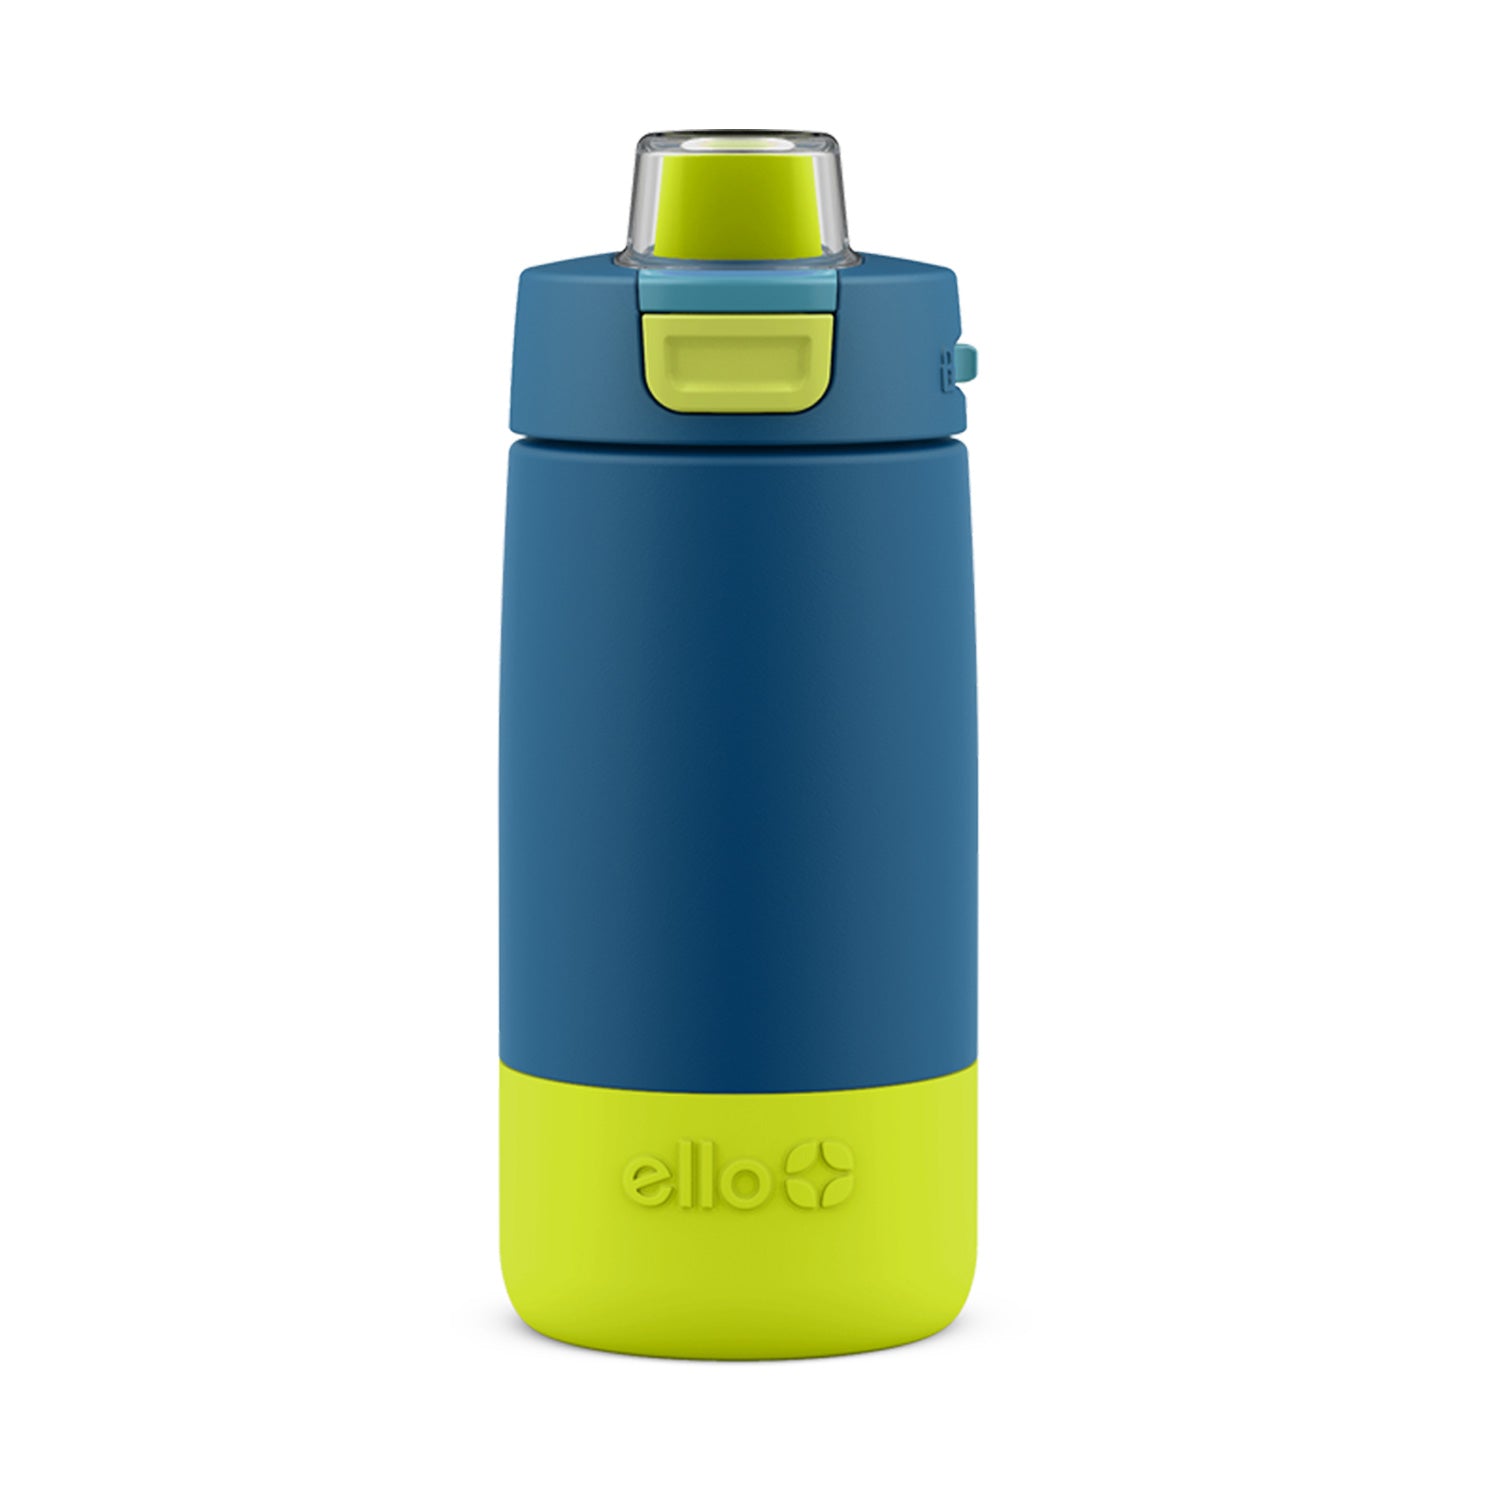 Ello Max Kids Vacuum Insulated Stainless Steel Water Bottle with